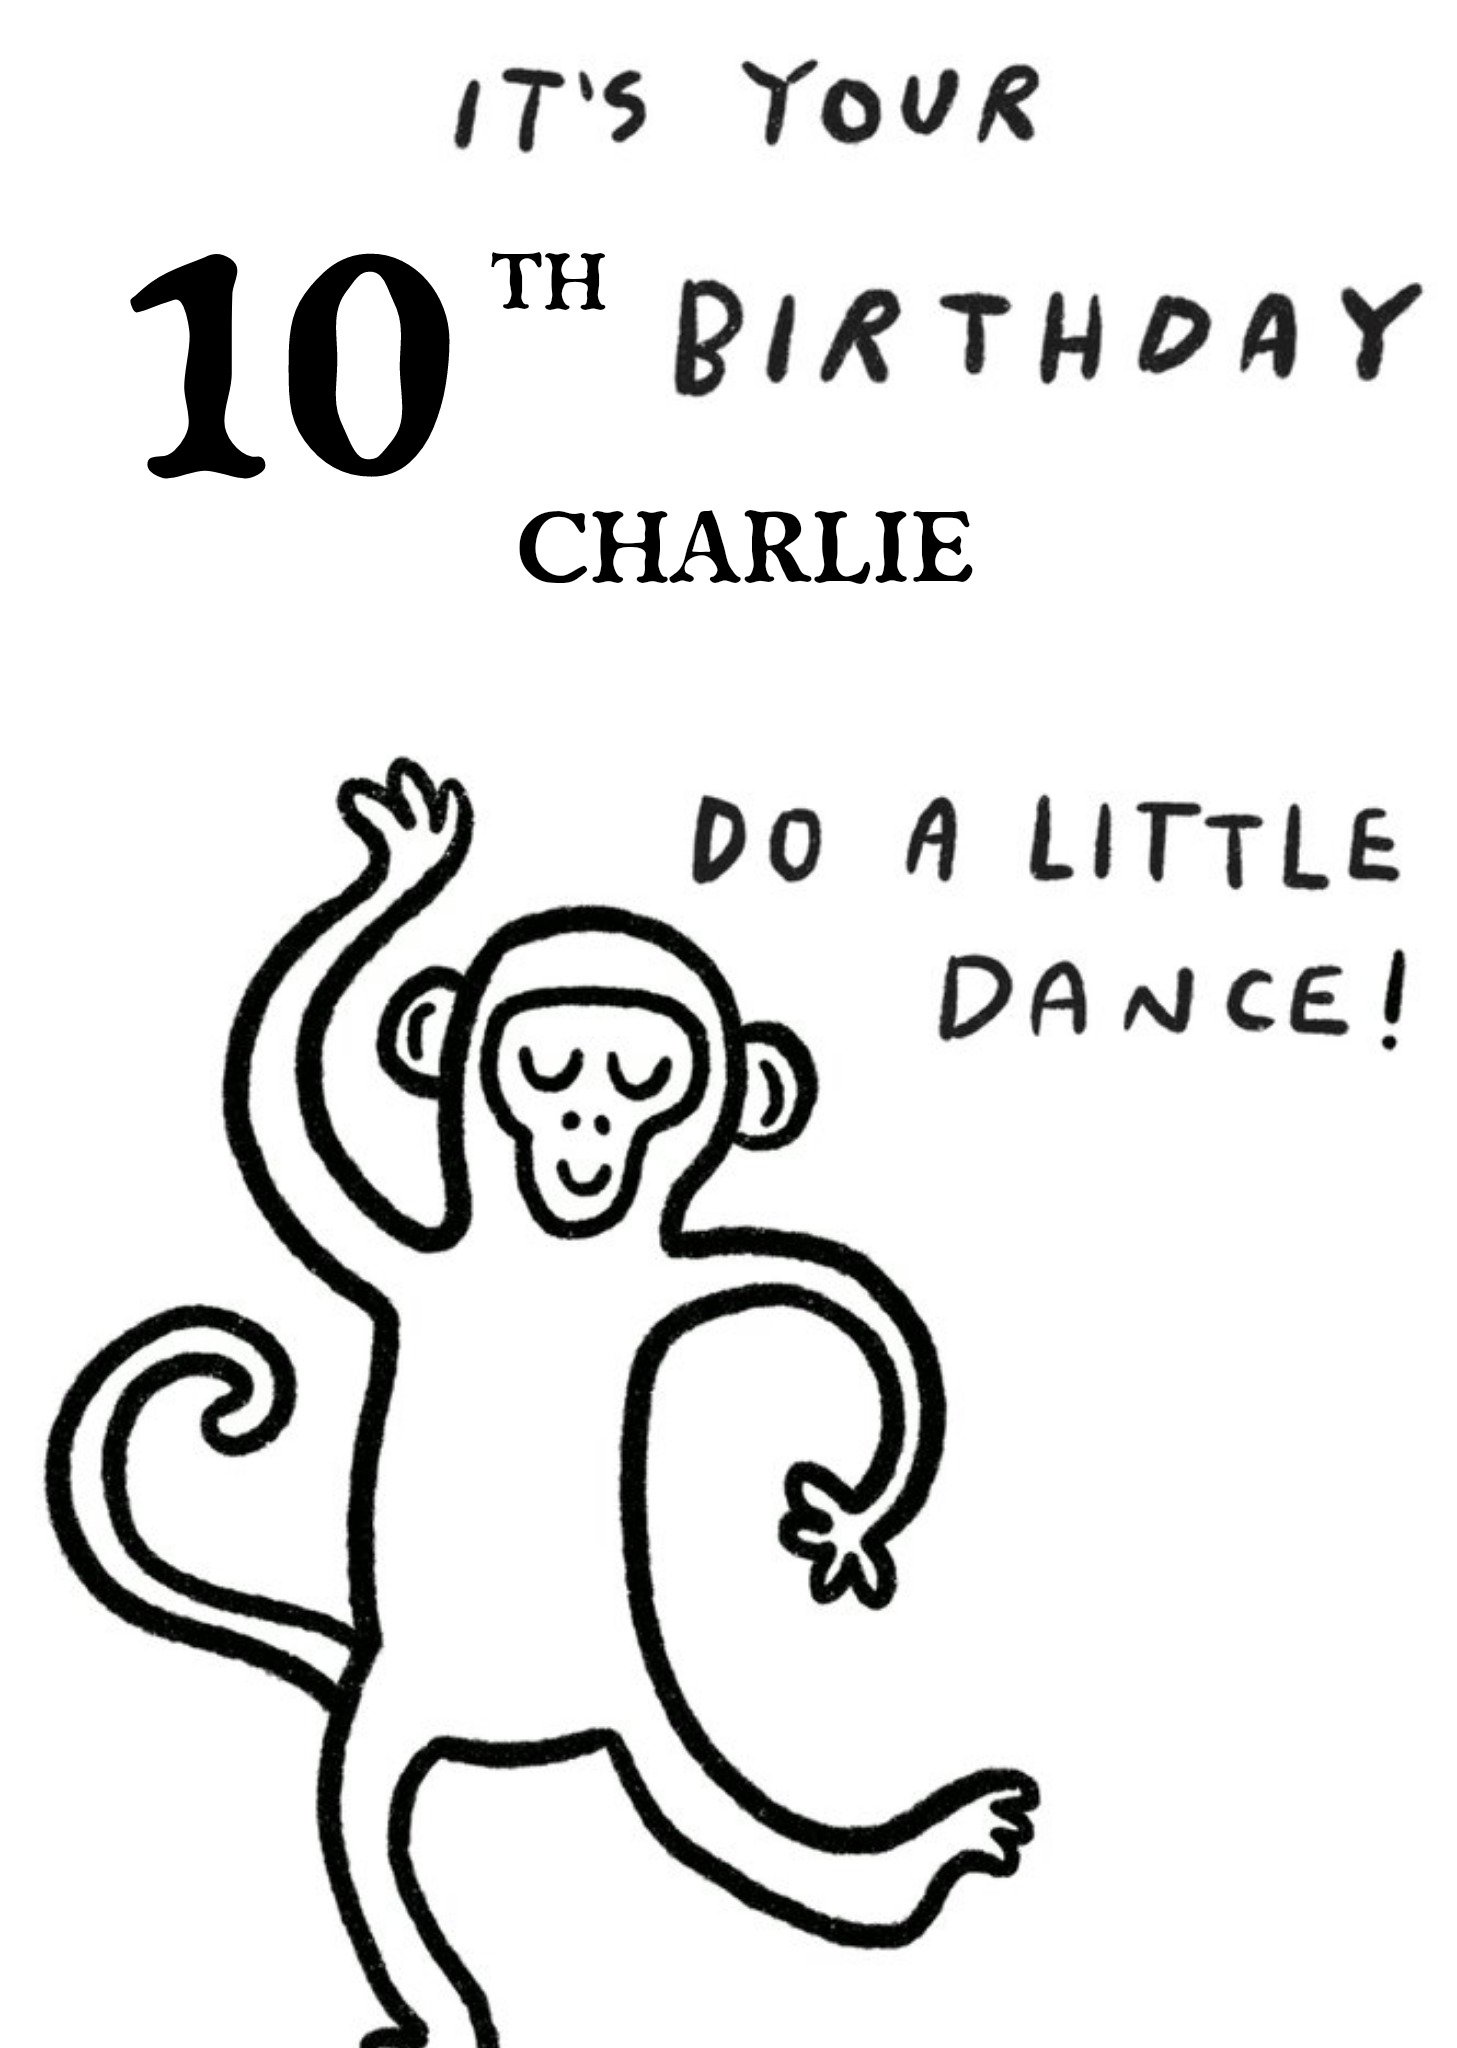 Moonpig Humorous Typographic Do A Little Dance Birthday Card, Large